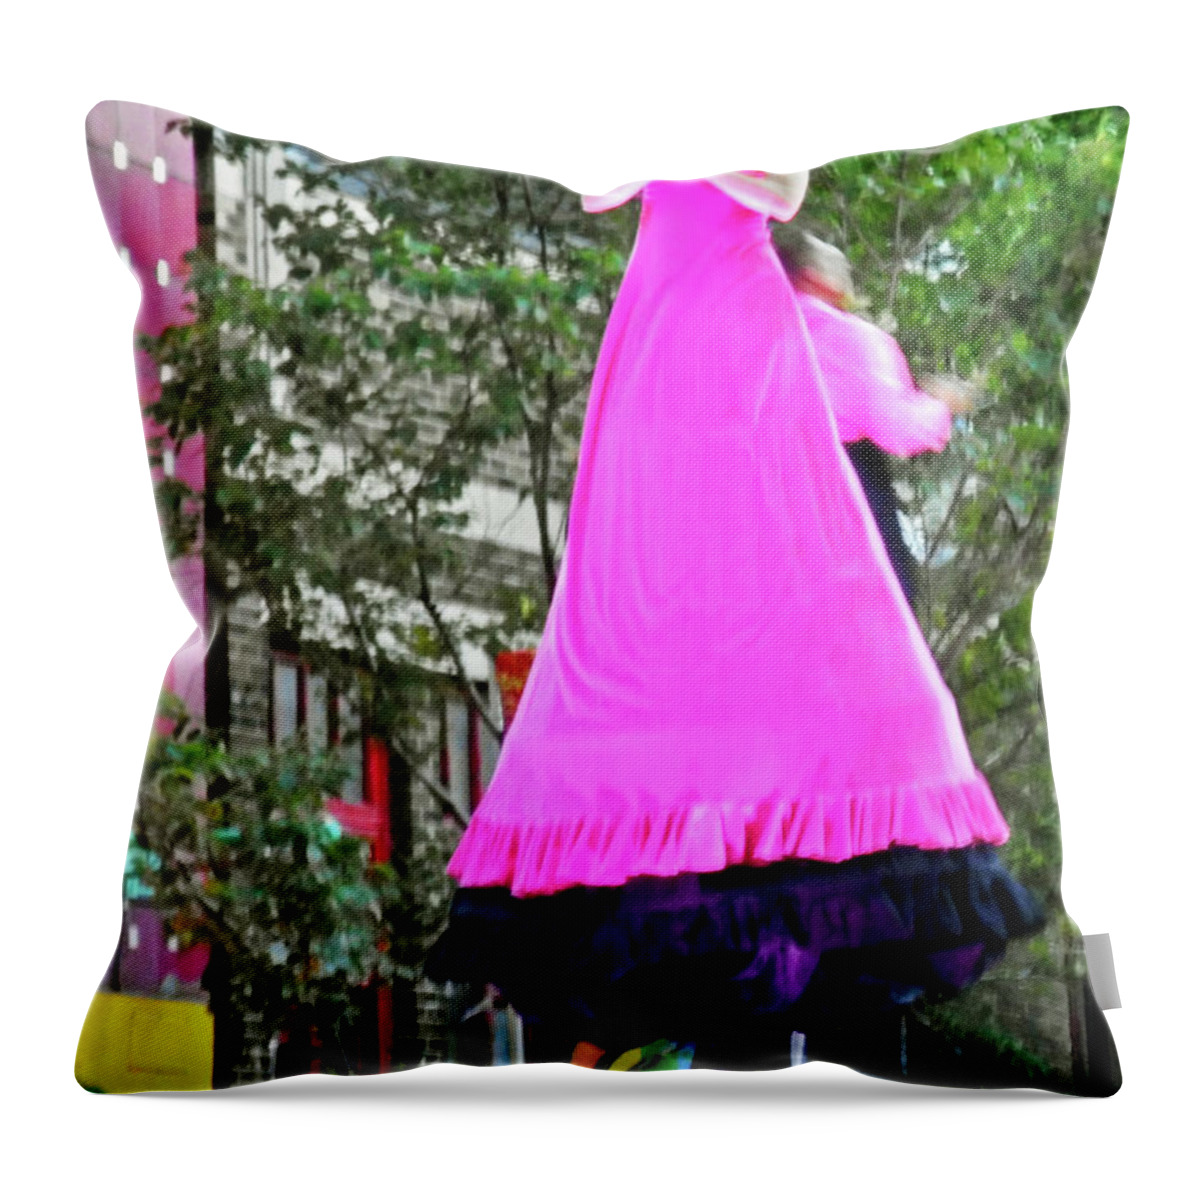 Montreal Throw Pillow featuring the photograph Street Performers 3 by Ron Kandt